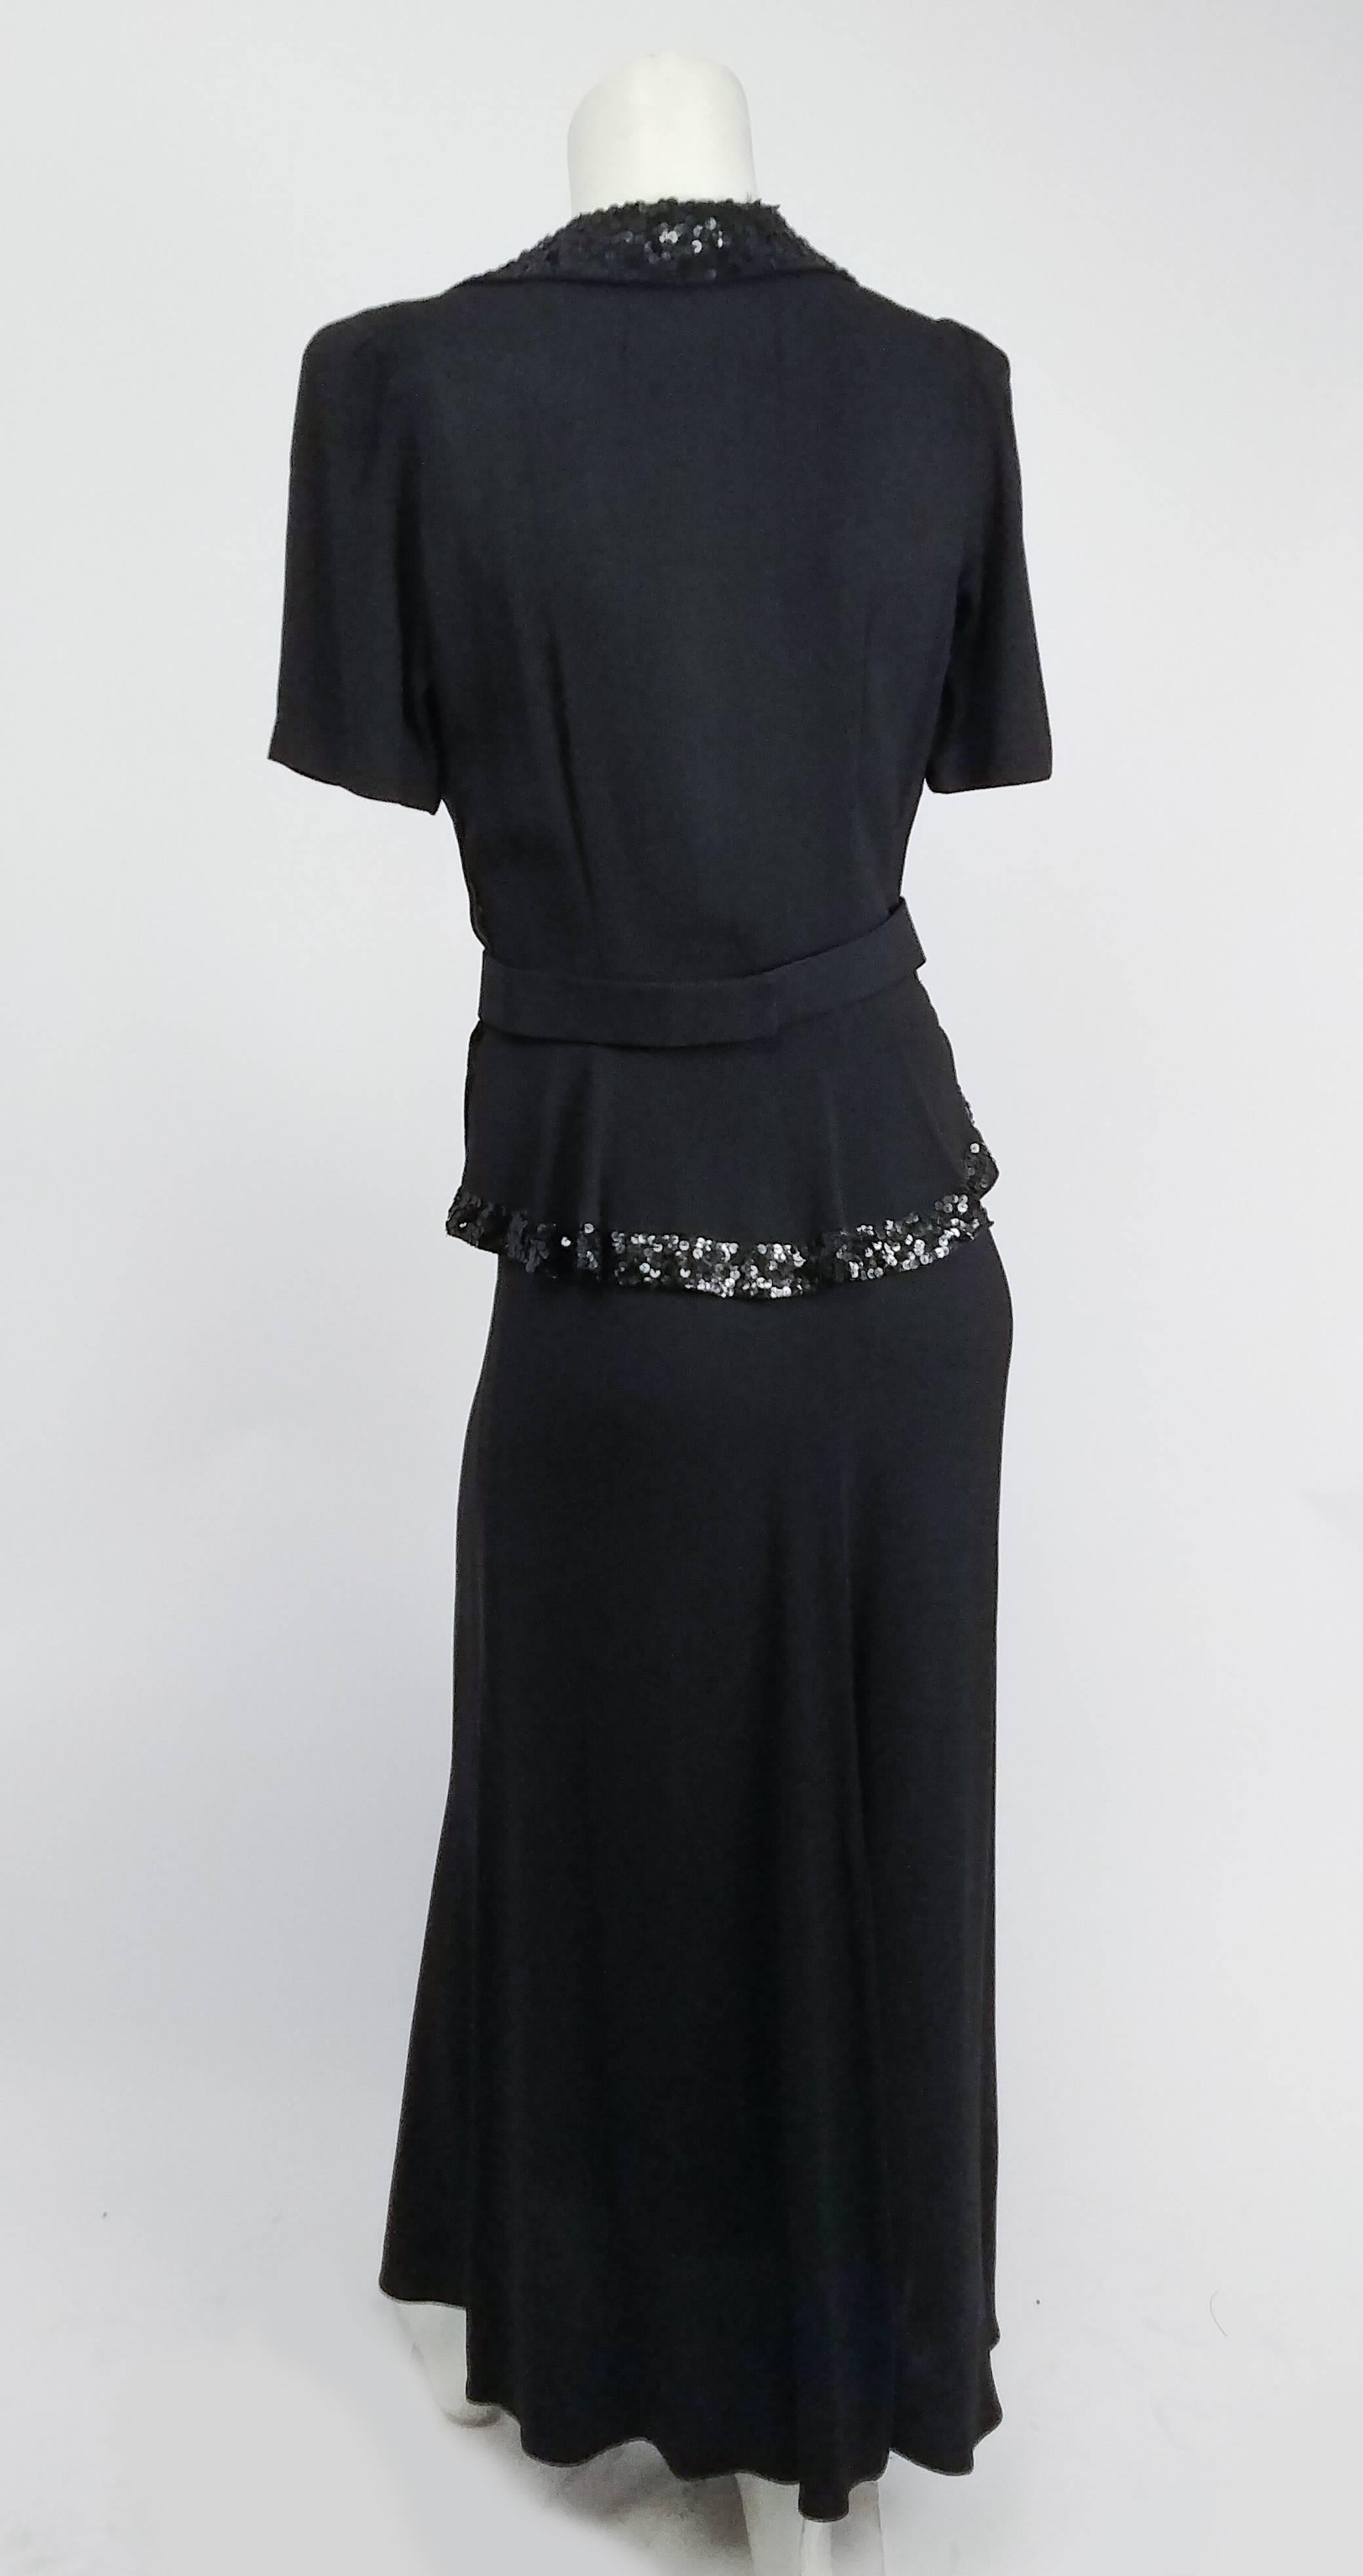 Women's 1930s Black Crepe Day Dress with Sequins